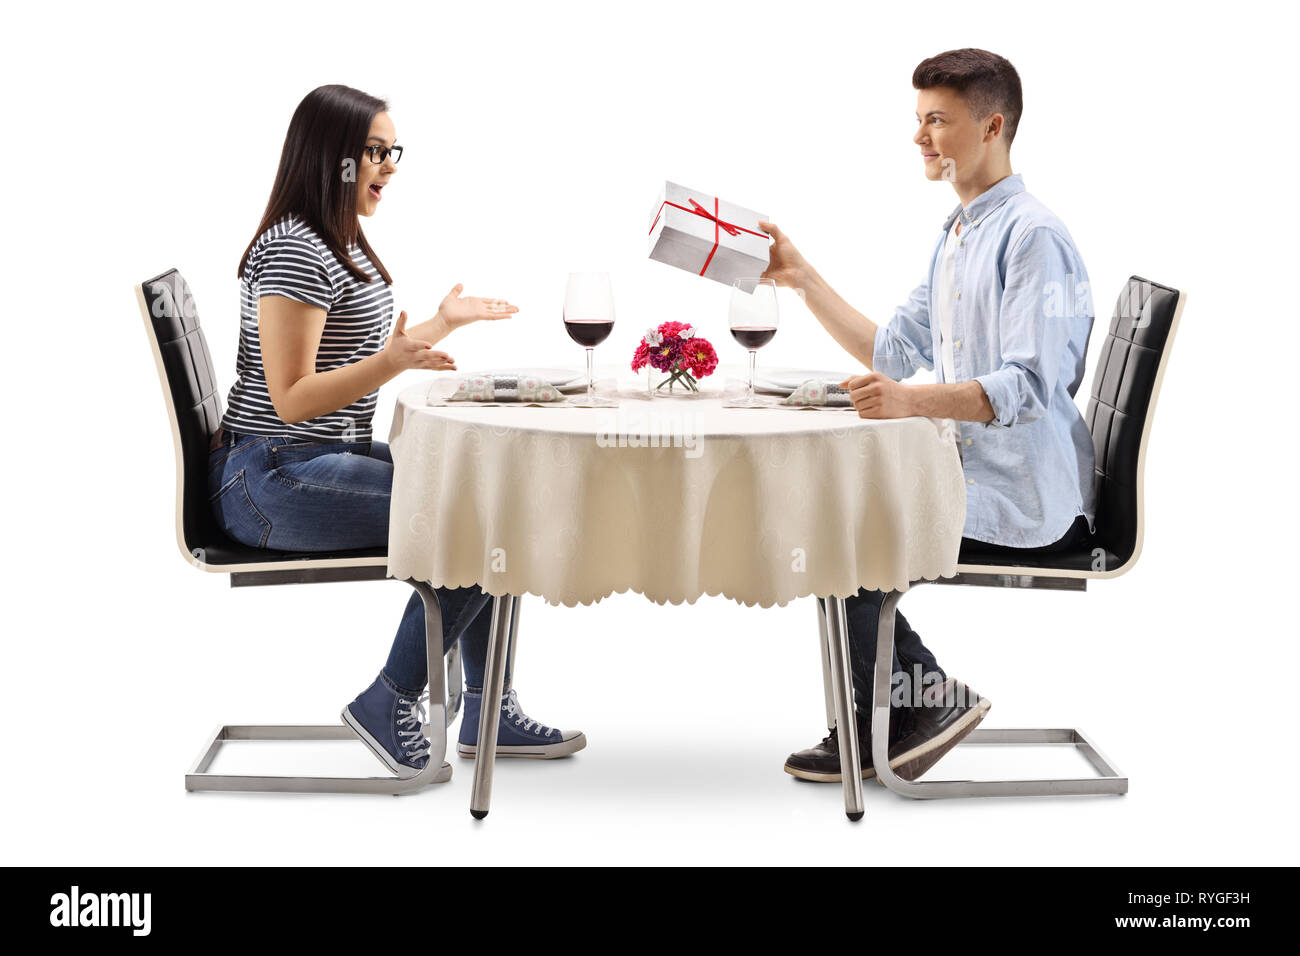 Young male giving a present to a young female at a restaurant table isolated on white background Stock Photo